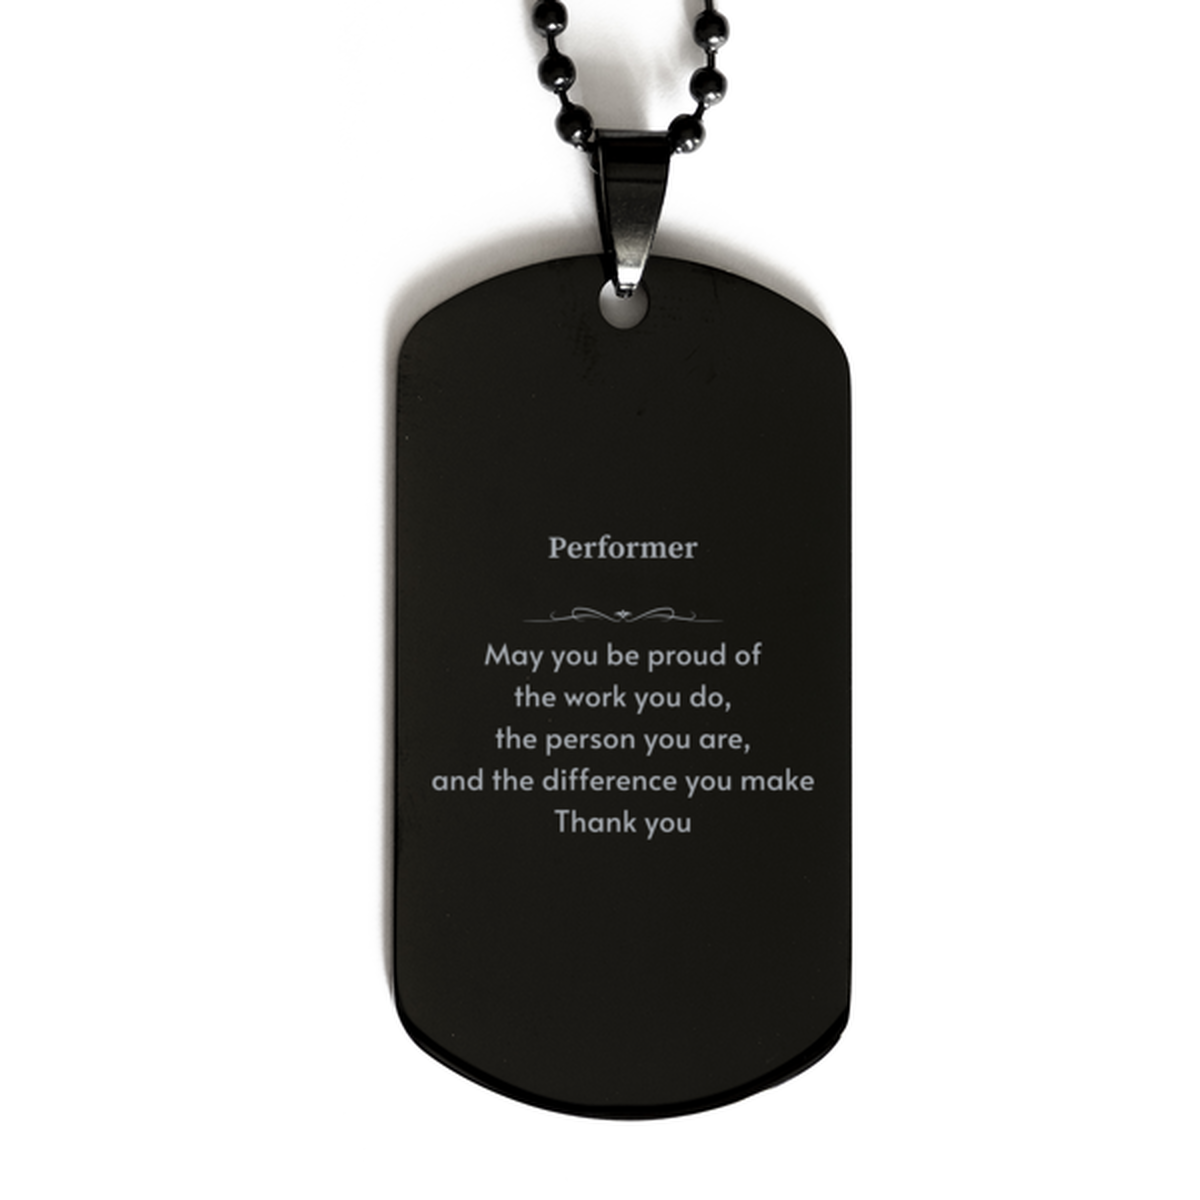 Heartwarming Black Dog Tag Retirement Coworkers Gifts for Performer, Performer May You be proud of the work you do, the person you are Gifts for Boss Men Women Friends